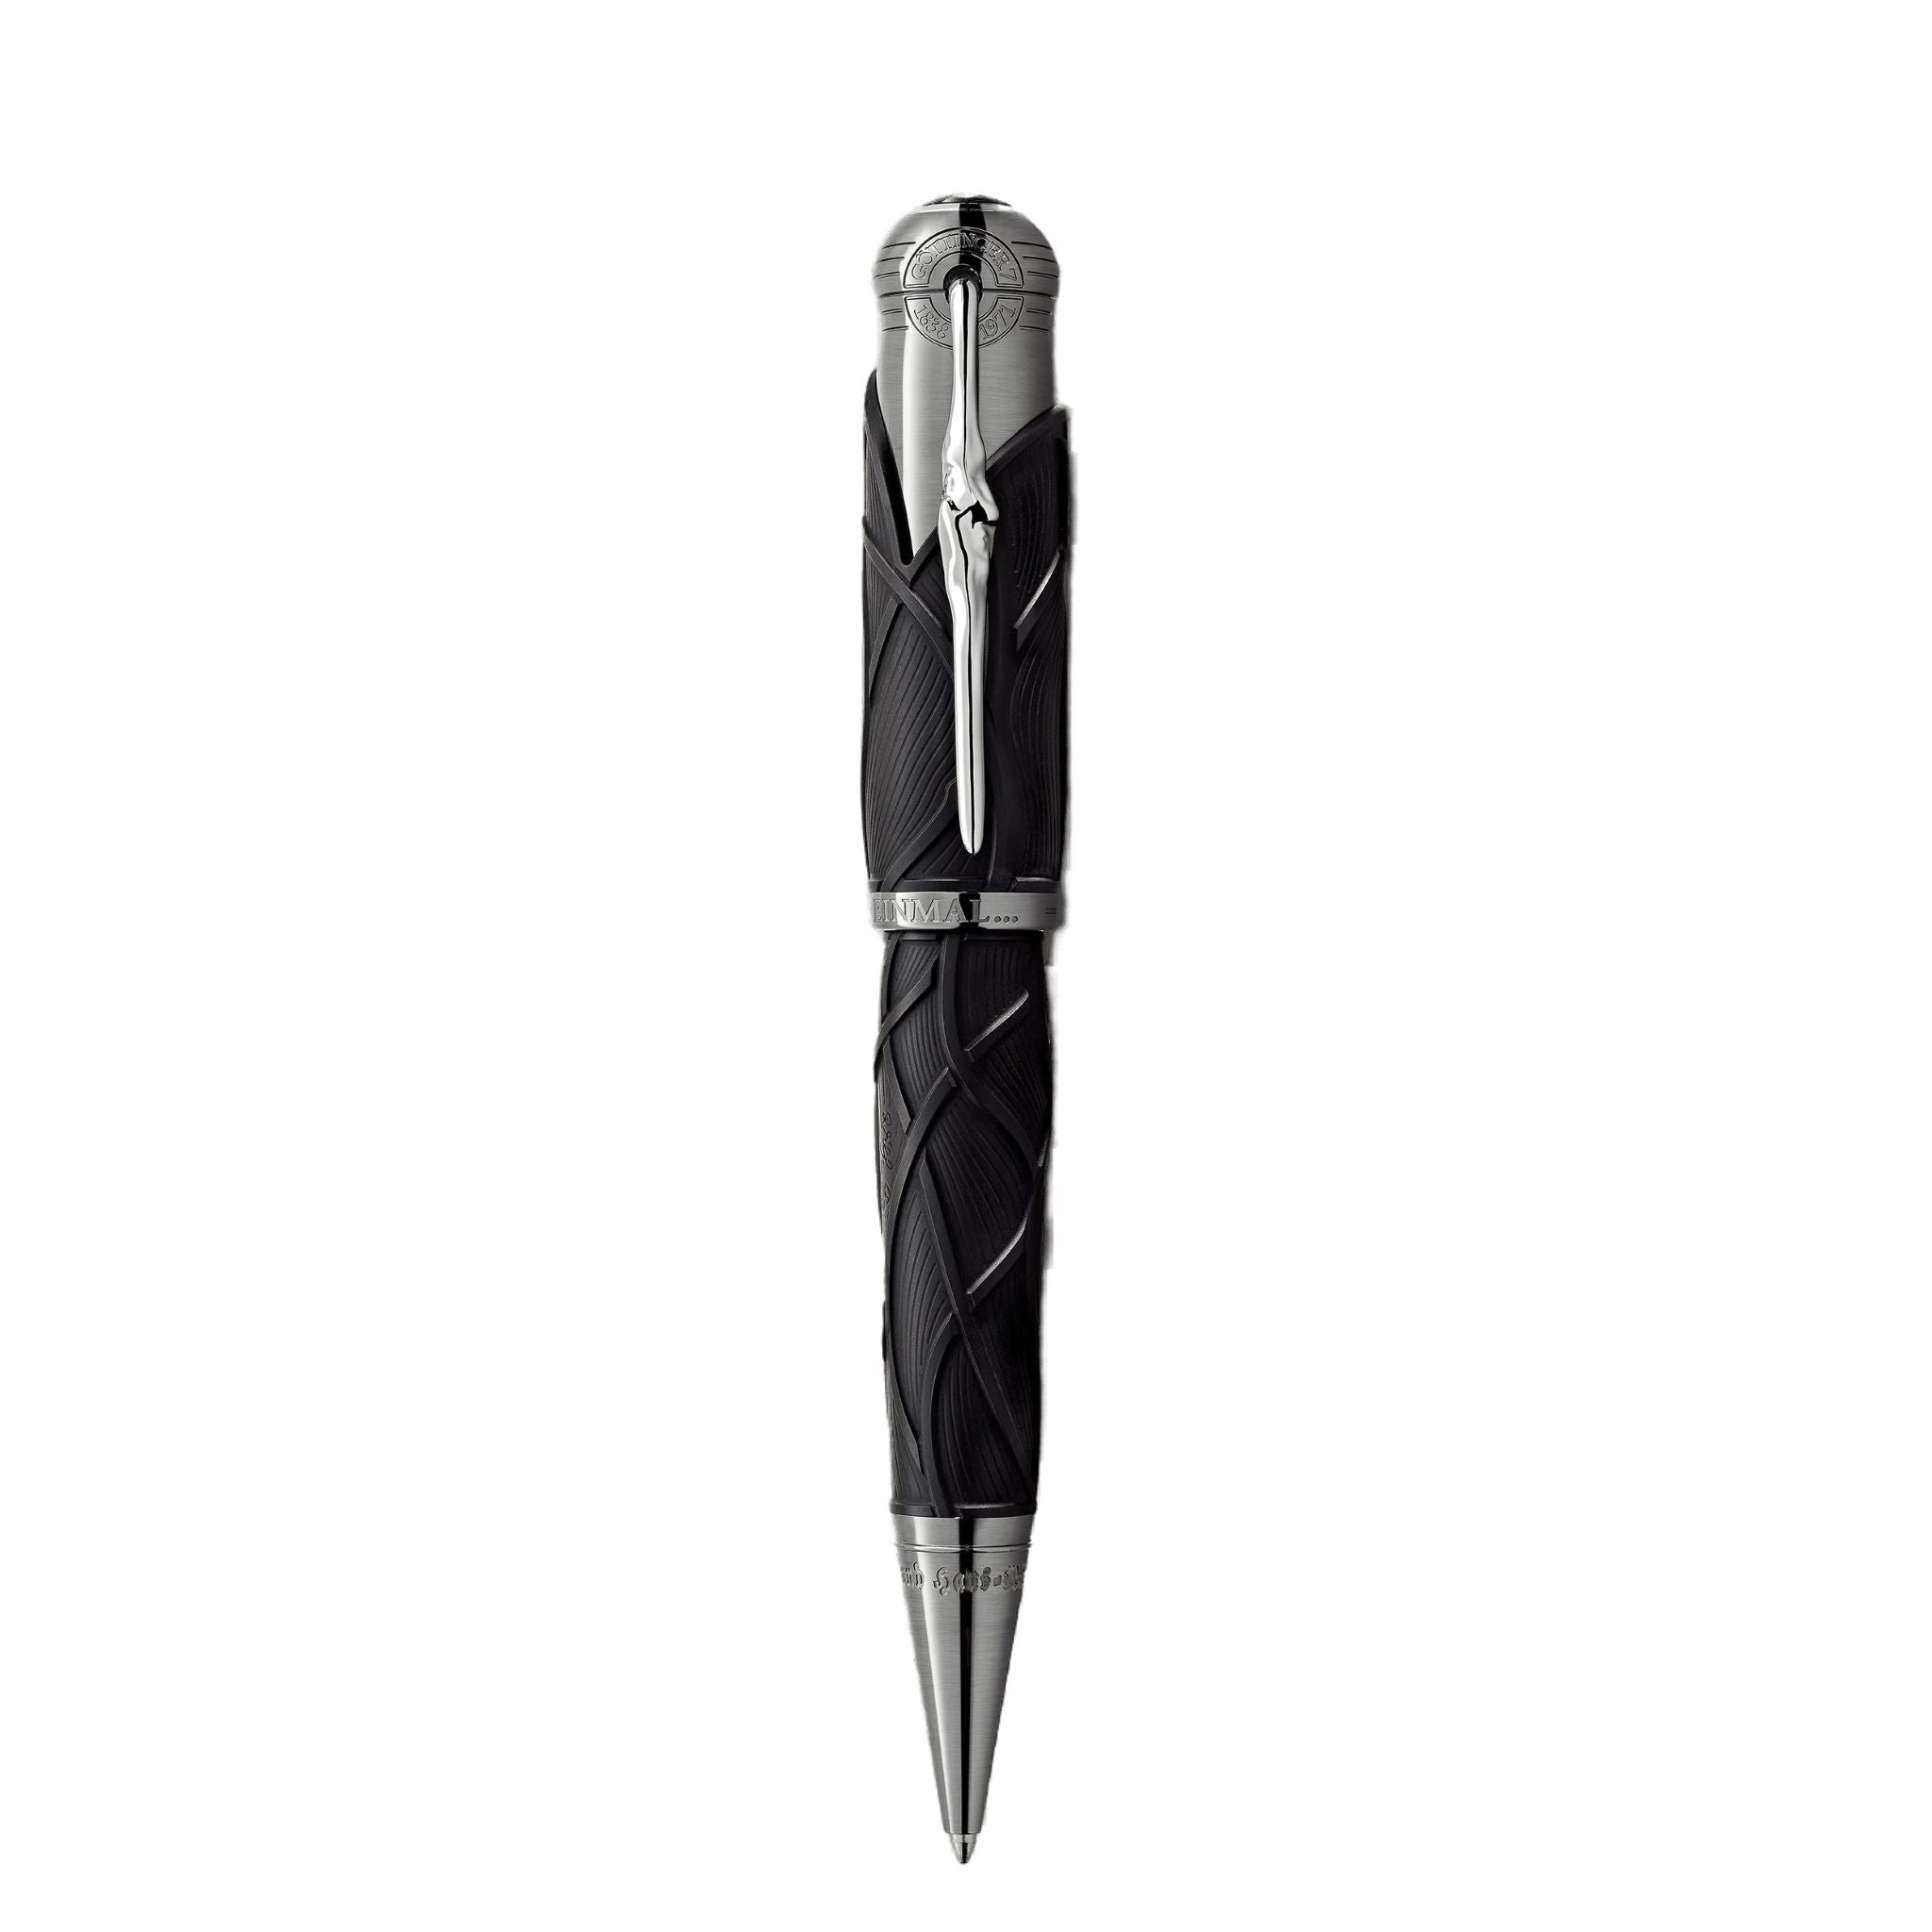 Montblanc Homage to the Brothers Grimm Limited Edition Ballpoint Pen